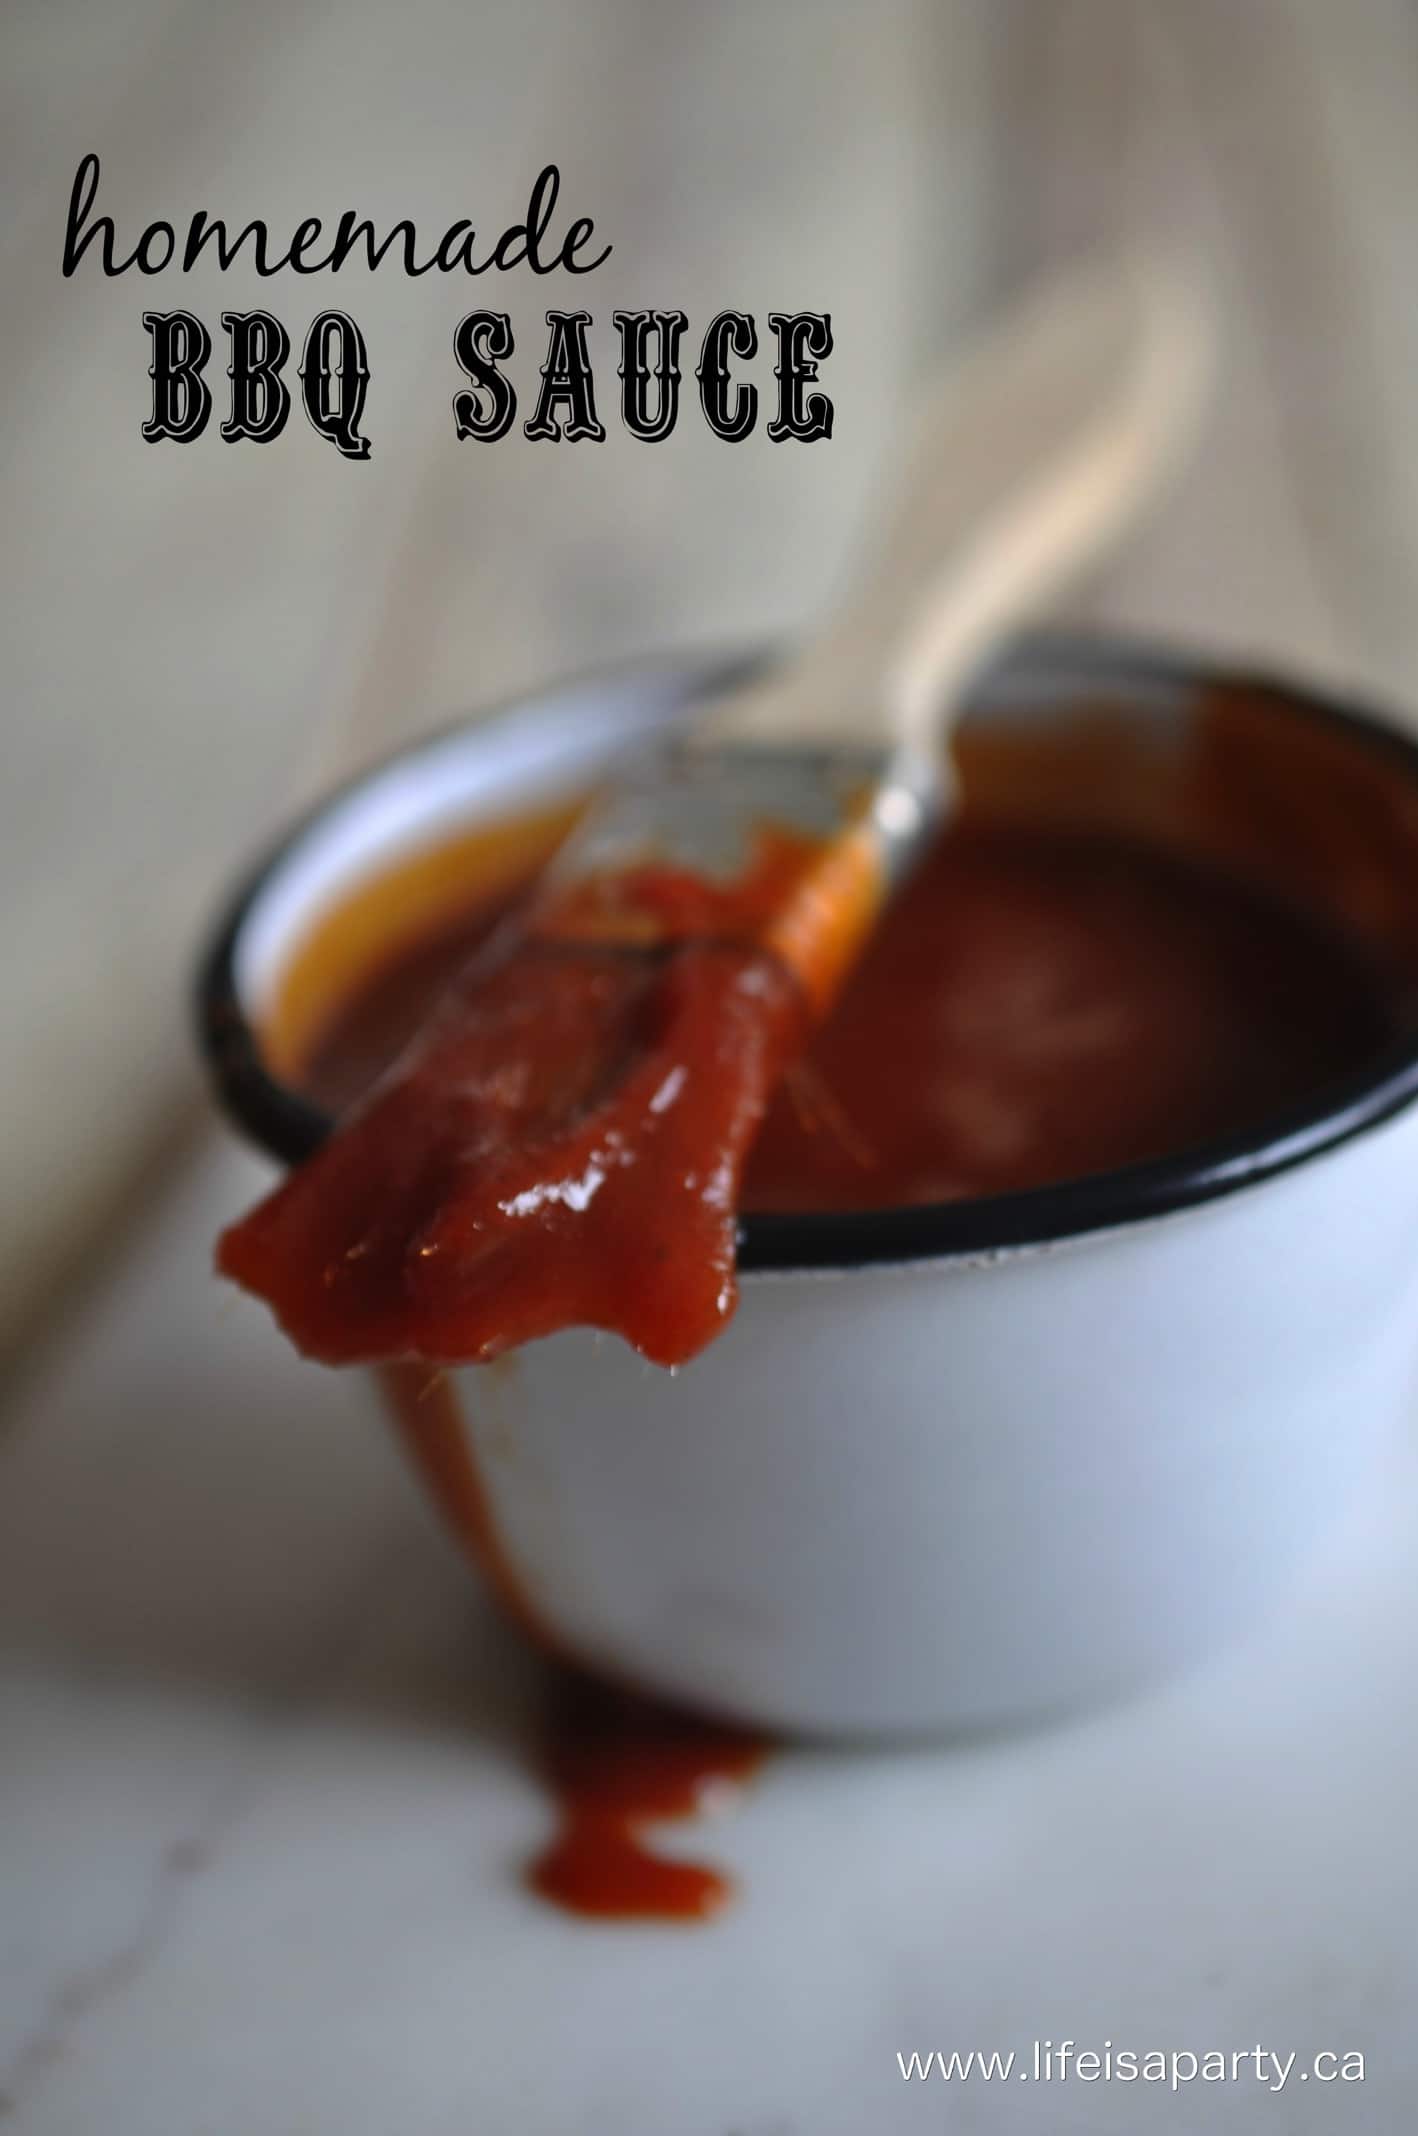 No Cook Homemade Hot Sauce: Make this sauce in minutes in your blender and enjoy the hot tangy homemade hot sauce. The perfect Homemade Father's Day gift.